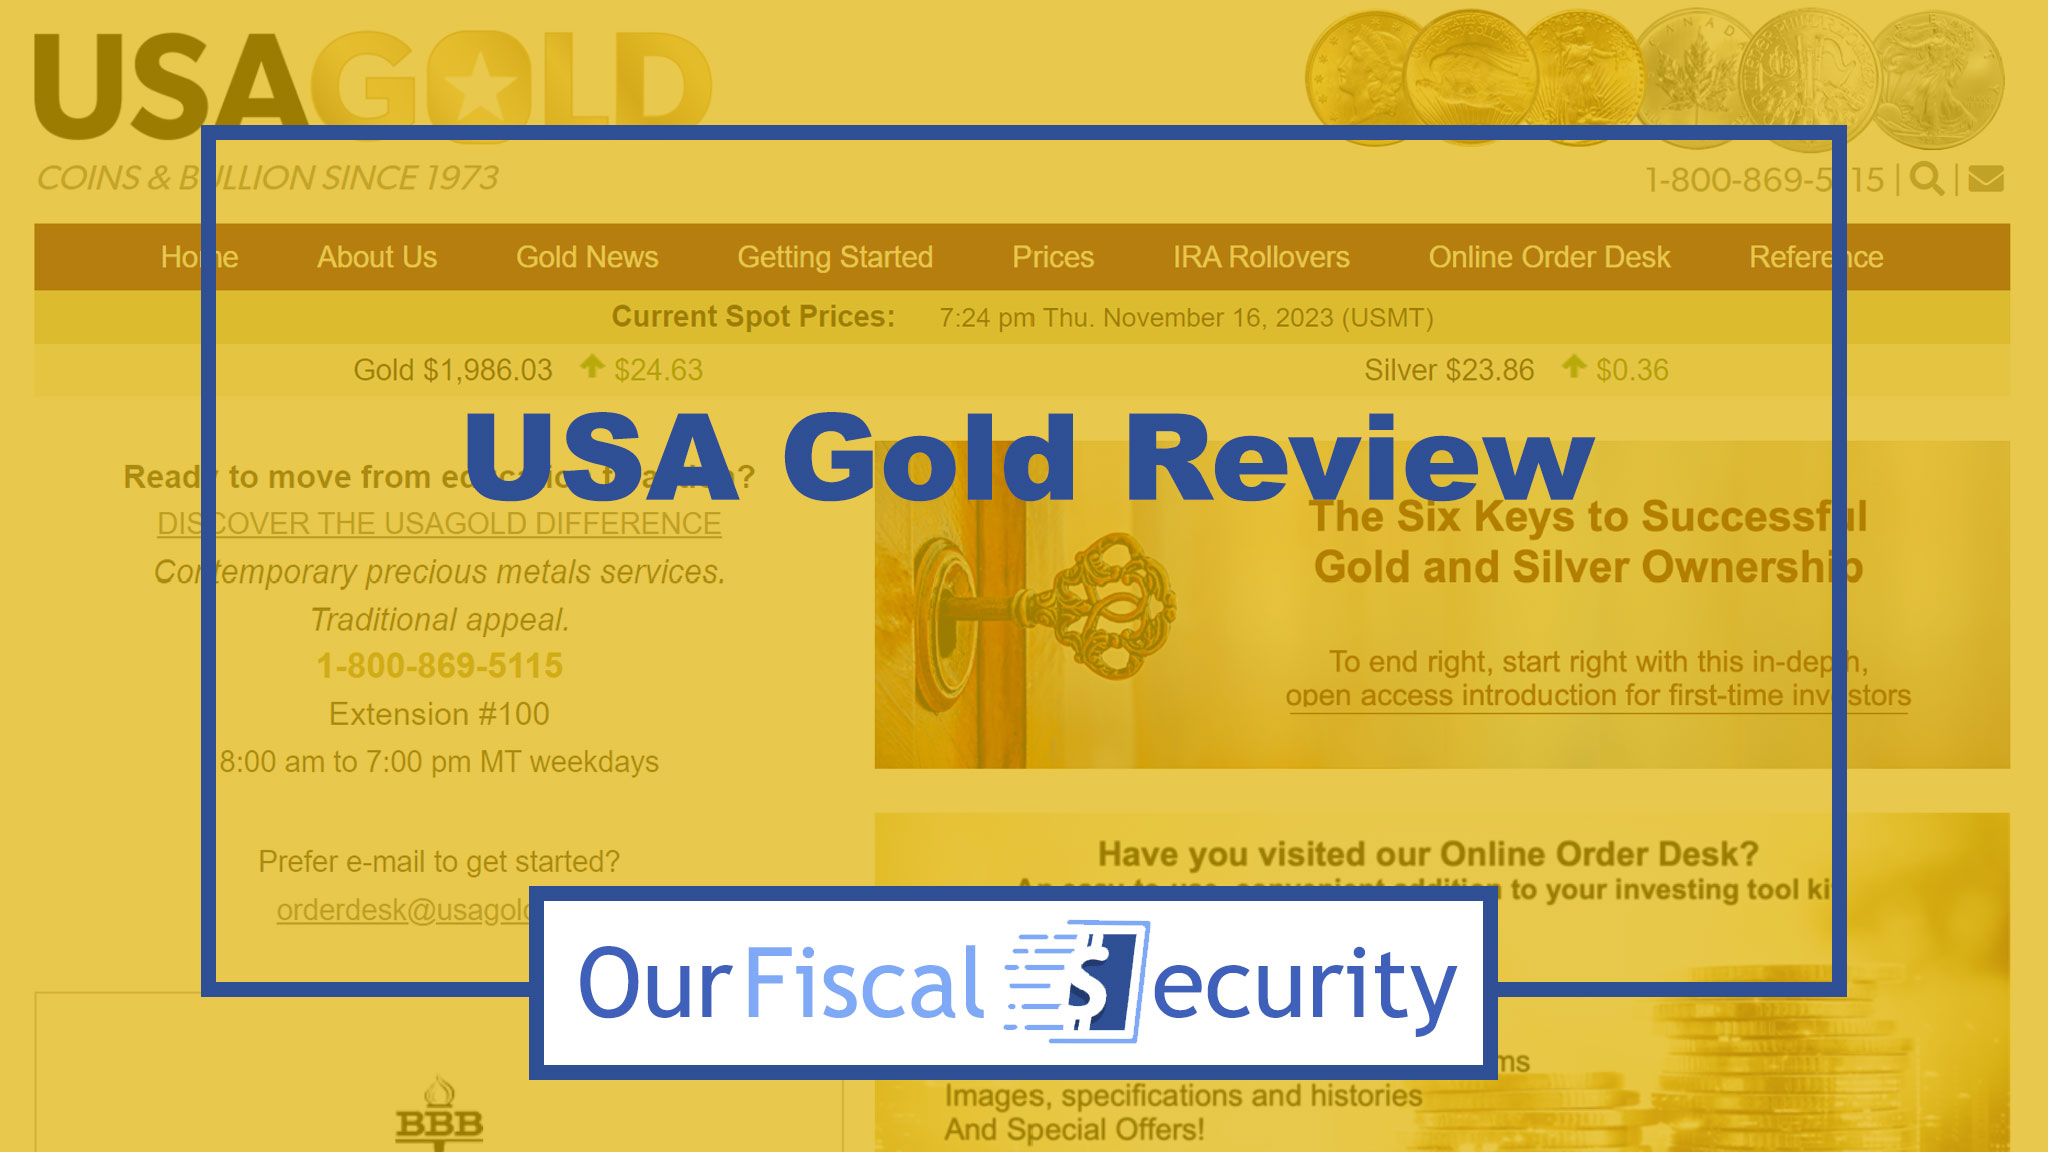 USA Gold Review